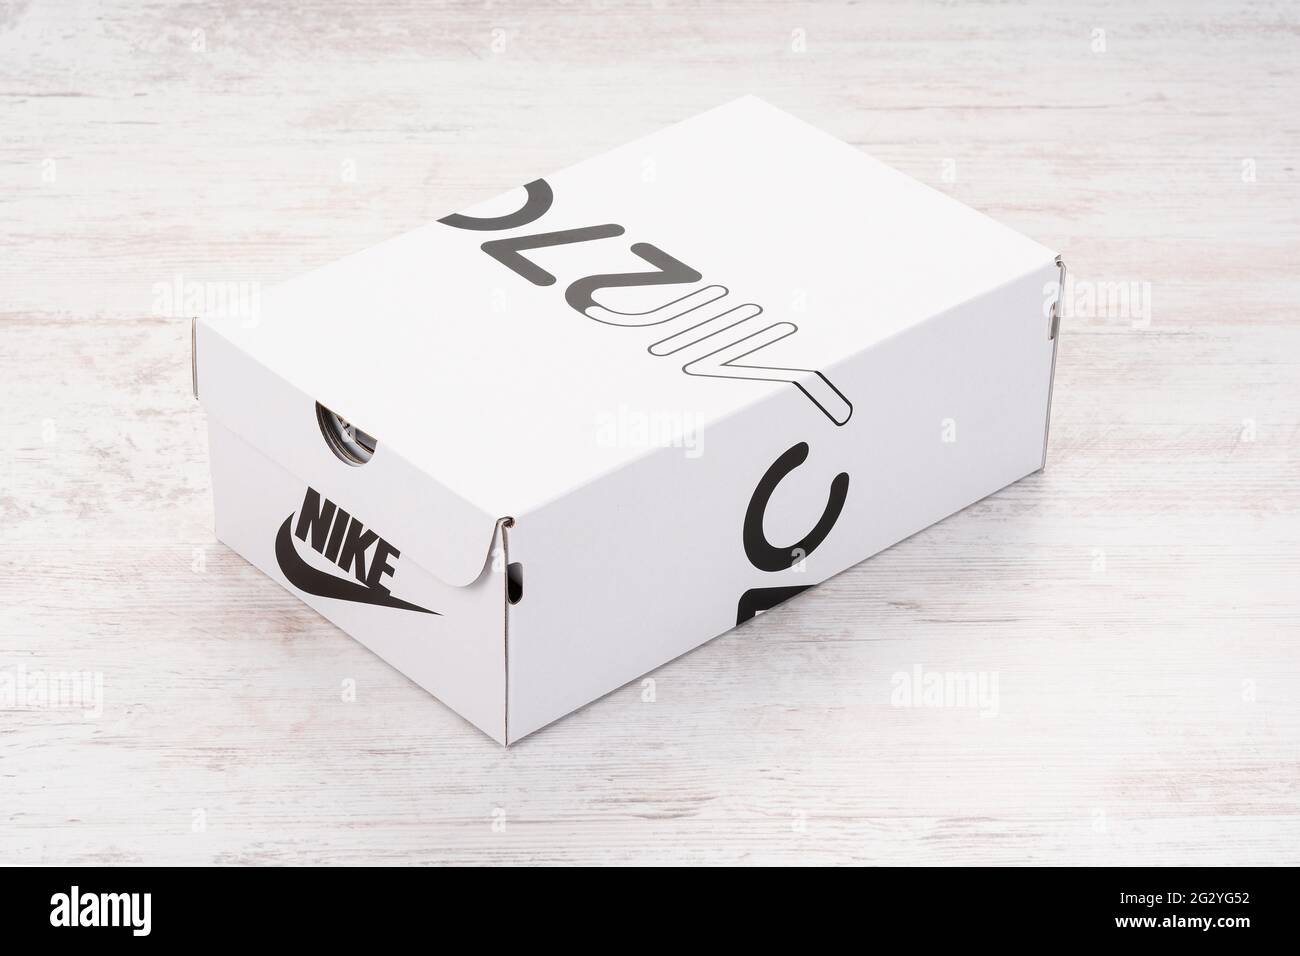 BURGAS, BULGARIA - DECEMBER 8, 2020: Nike Air MAX 270 REACT women's shoes - sneakers box white wooden background. Nike is a global sports clothes and Stock Photo